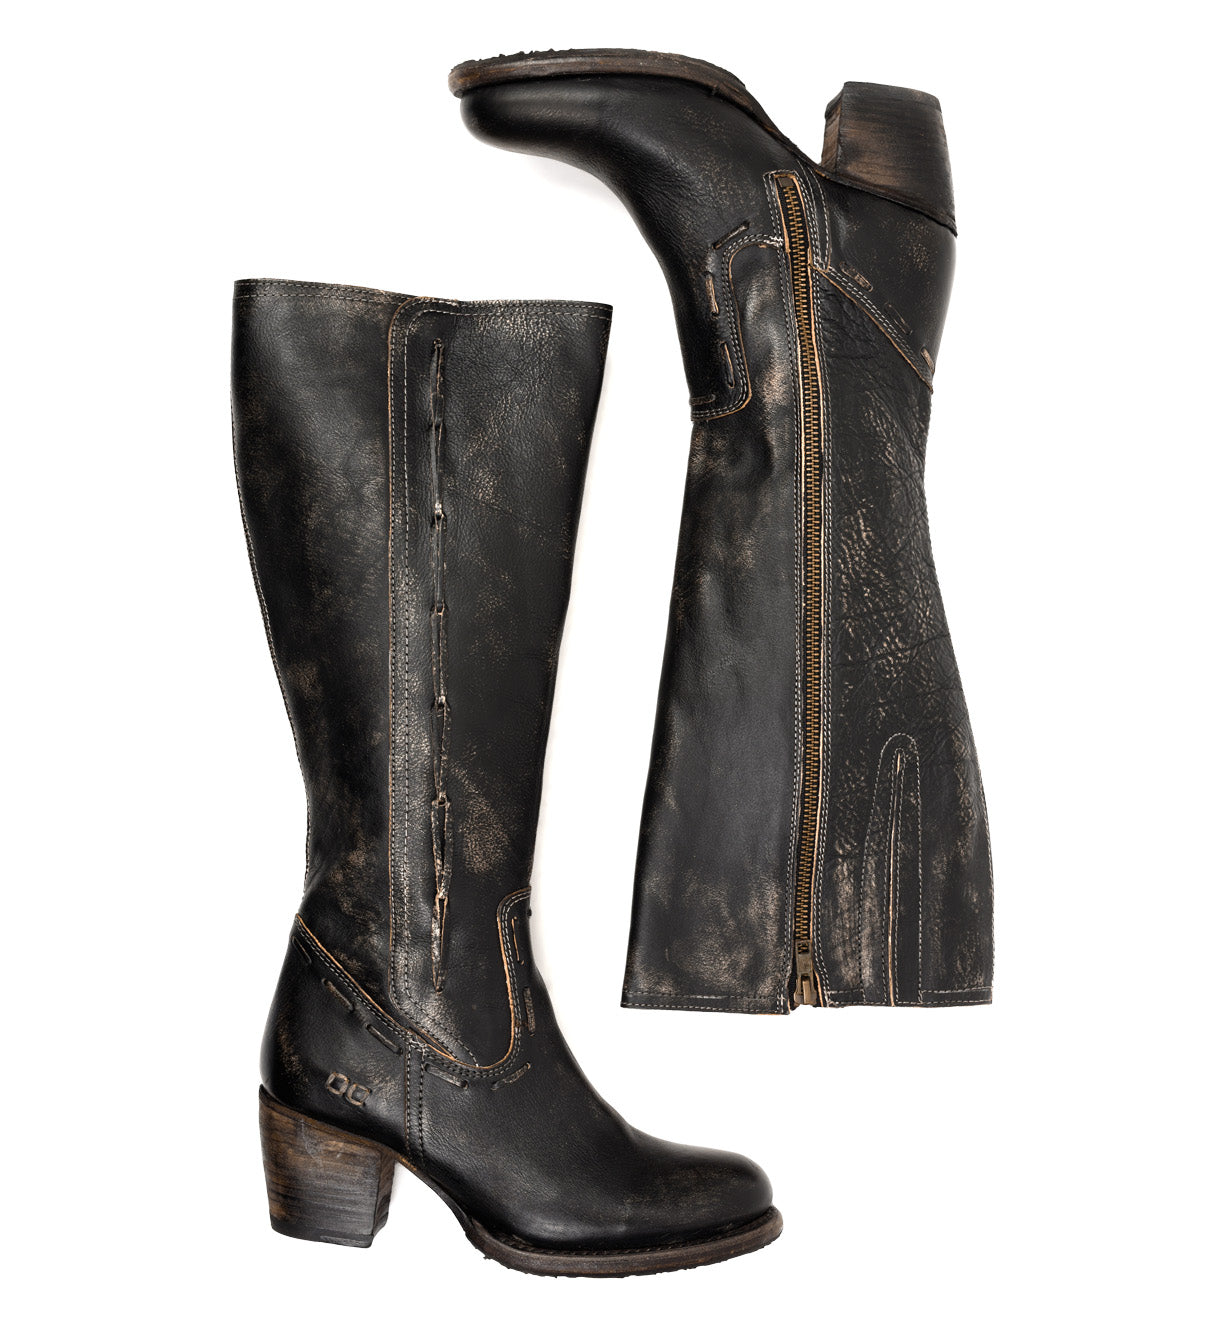 A pair of Bed Stu Fate women's black leather boots.